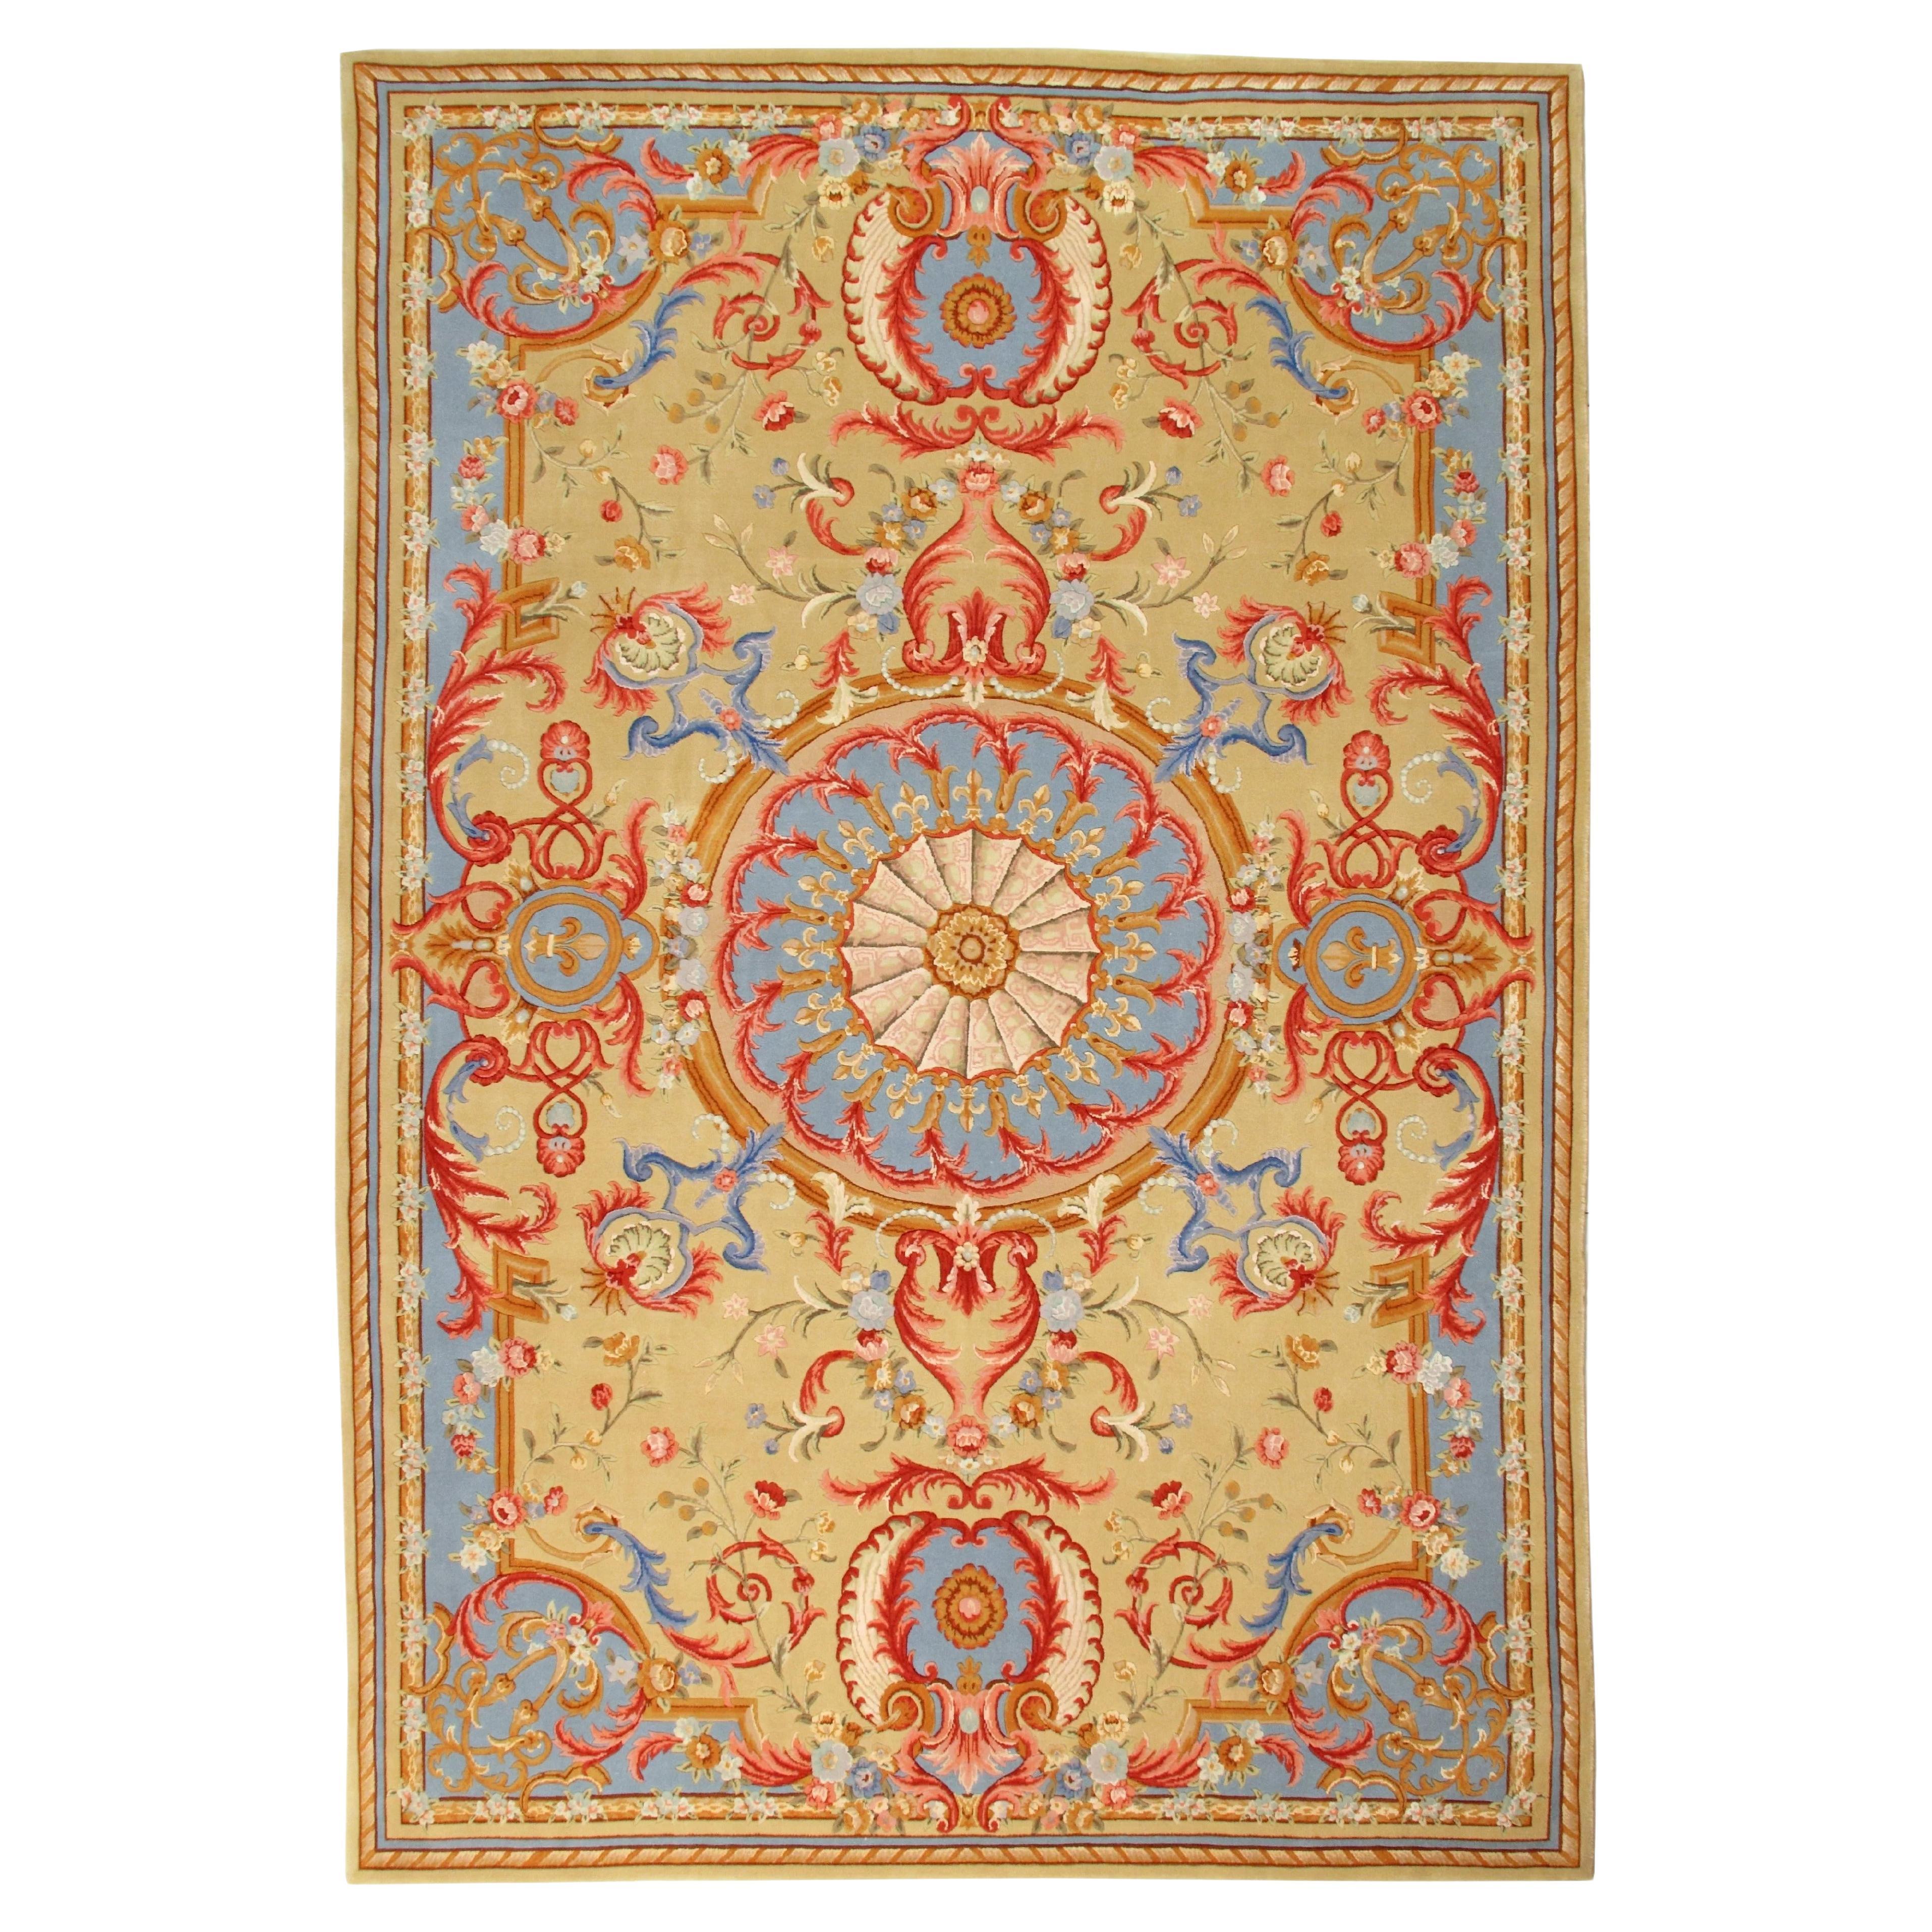 VIA COMO 'Versailles Due' Rug Hand Knotted Wool Silk Carpet Vintage 6x9 Baroque For Sale